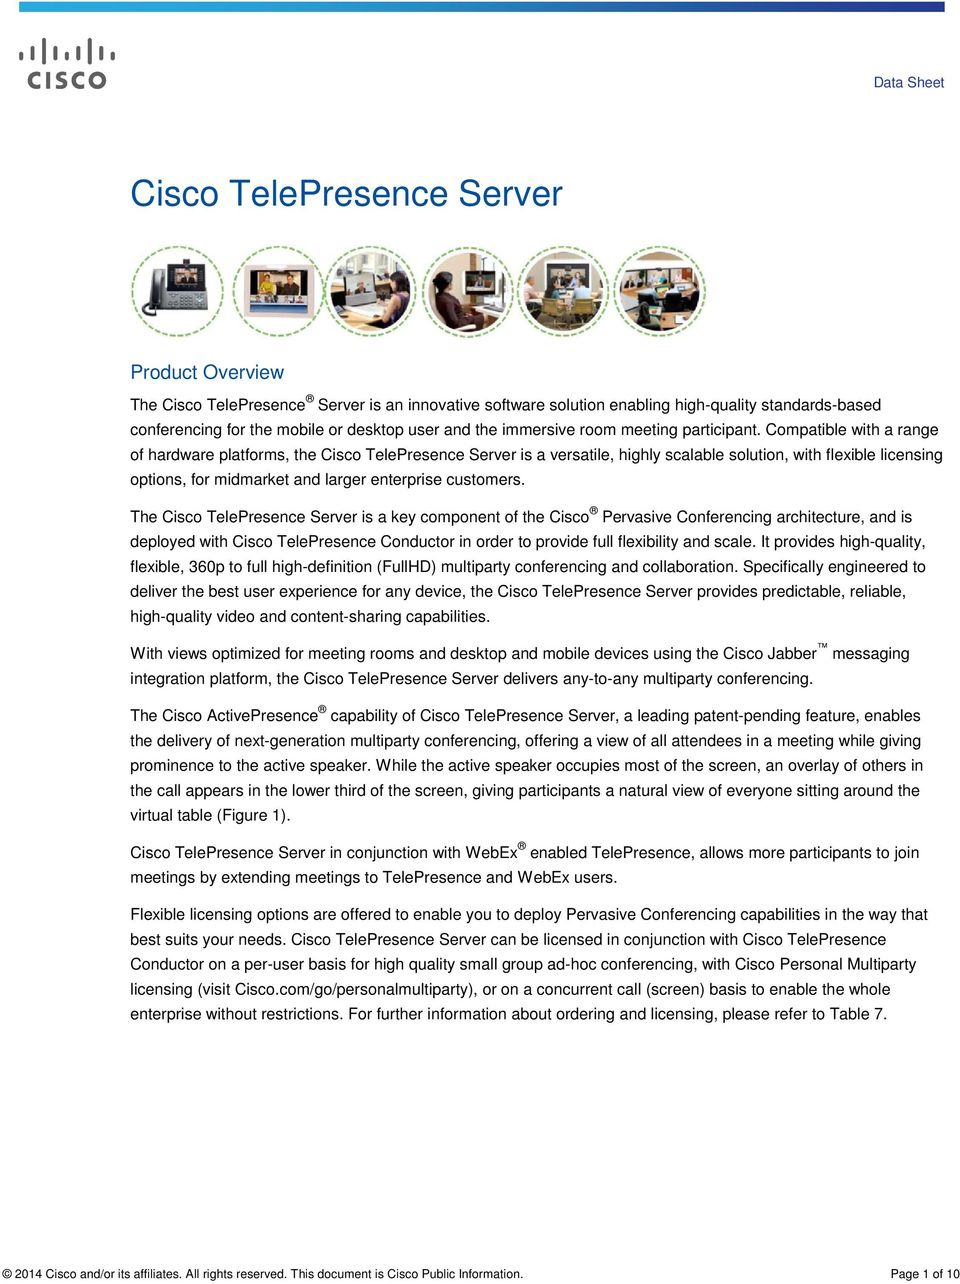 Compatible with a range of hardware platforms, the Cisco TelePresence Server is a versatile, highly scalable solution, with flexible licensing options, for midmarket and larger enterprise customers.